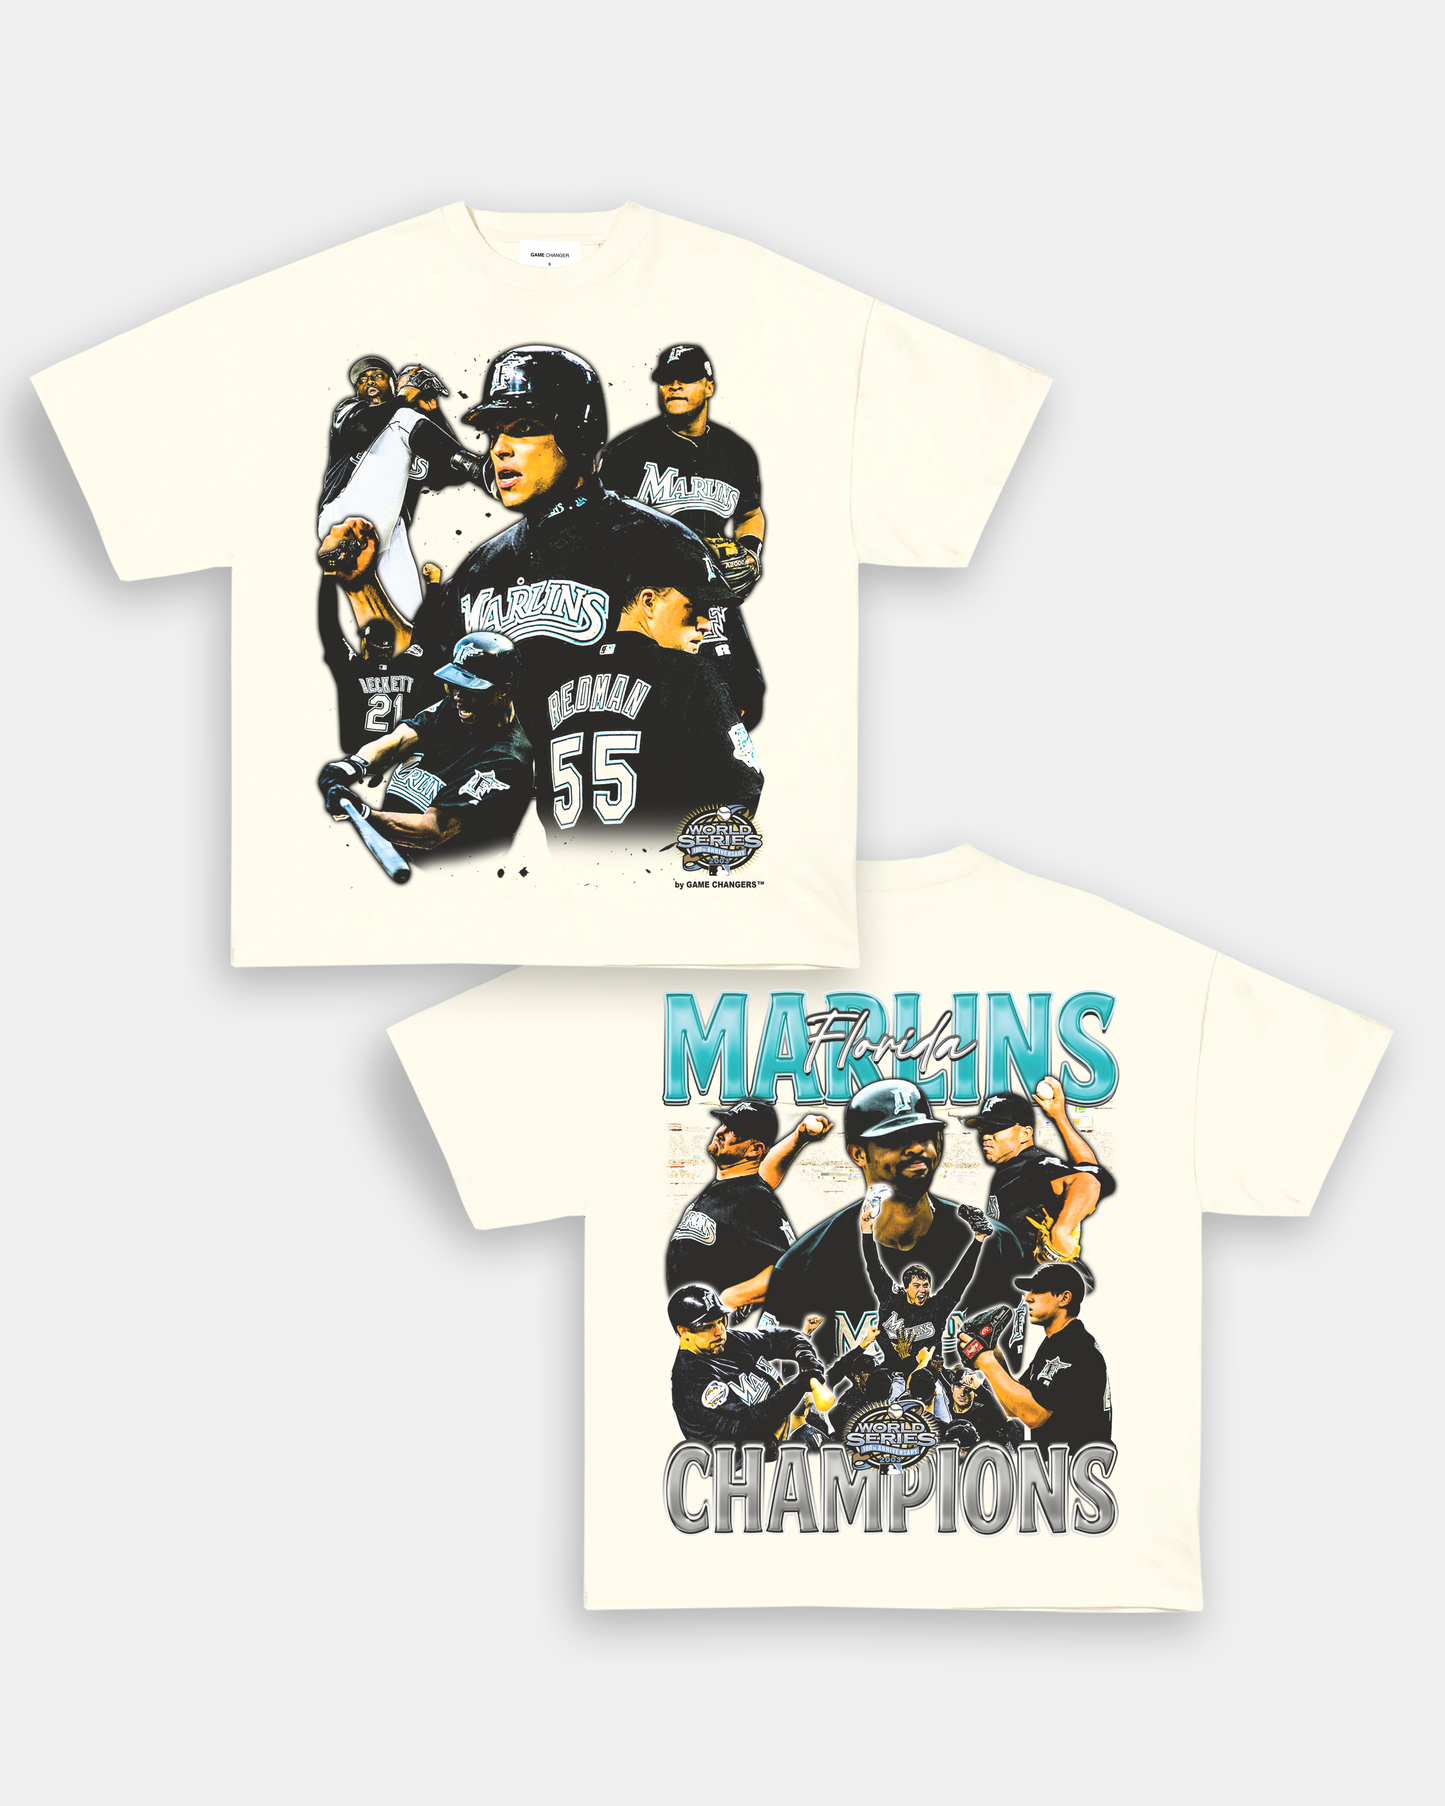 2003 WORLD SERIES CHAMPS - MARLINS TEE - [DS]